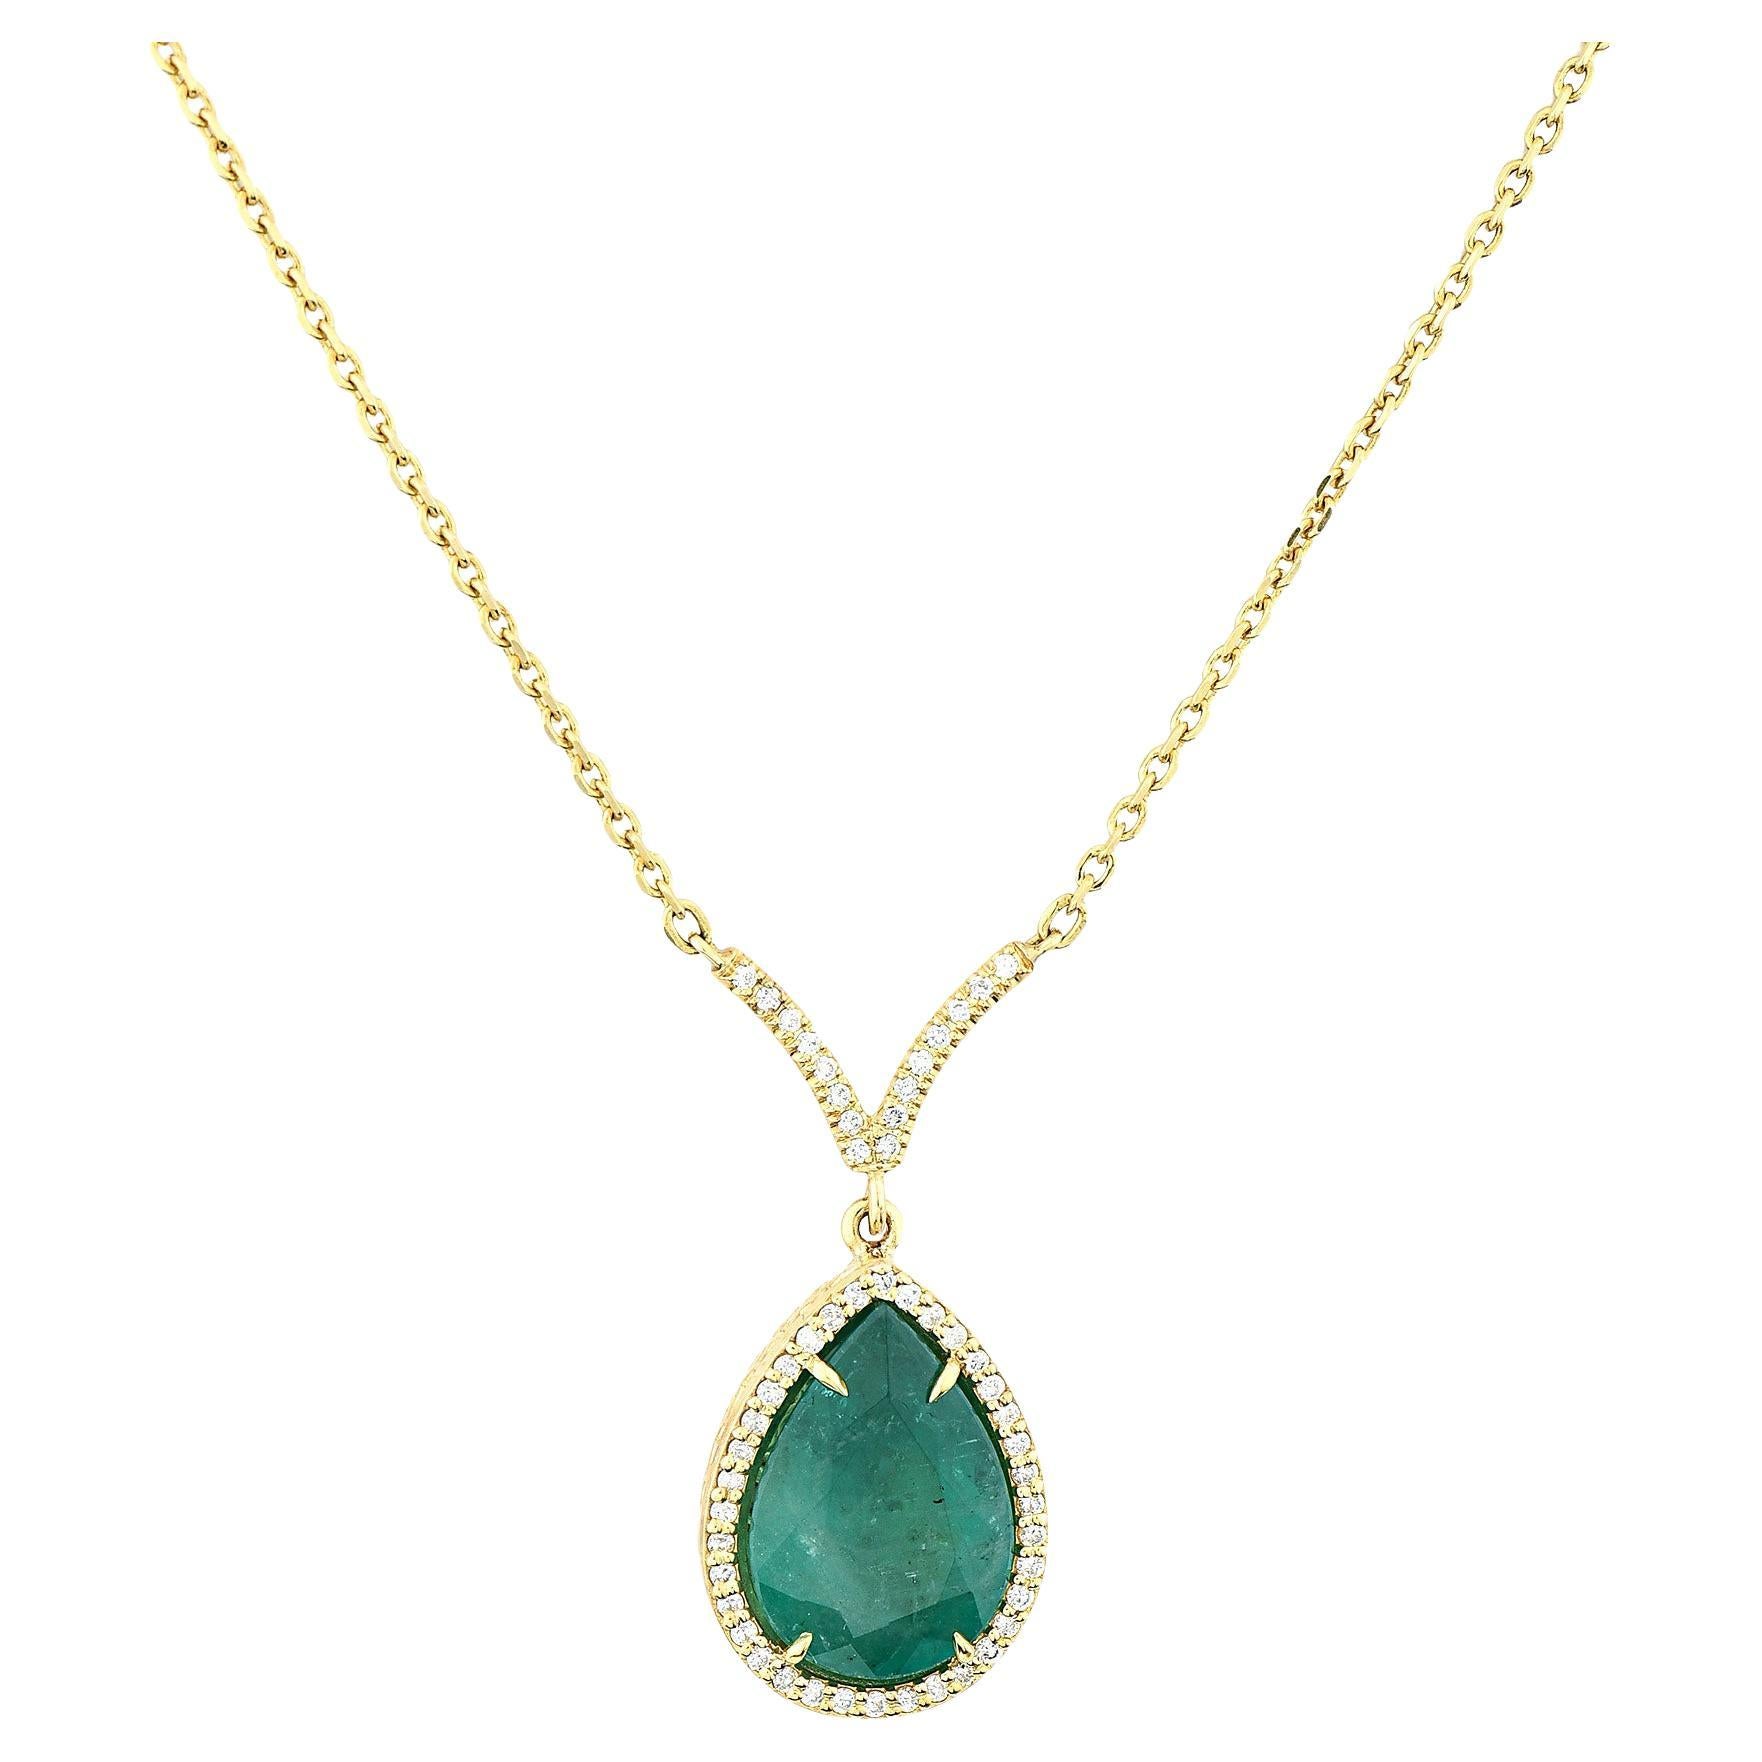 18k Yellow Gold Pear Shape Emerald Center with Diamond Halo Necklace